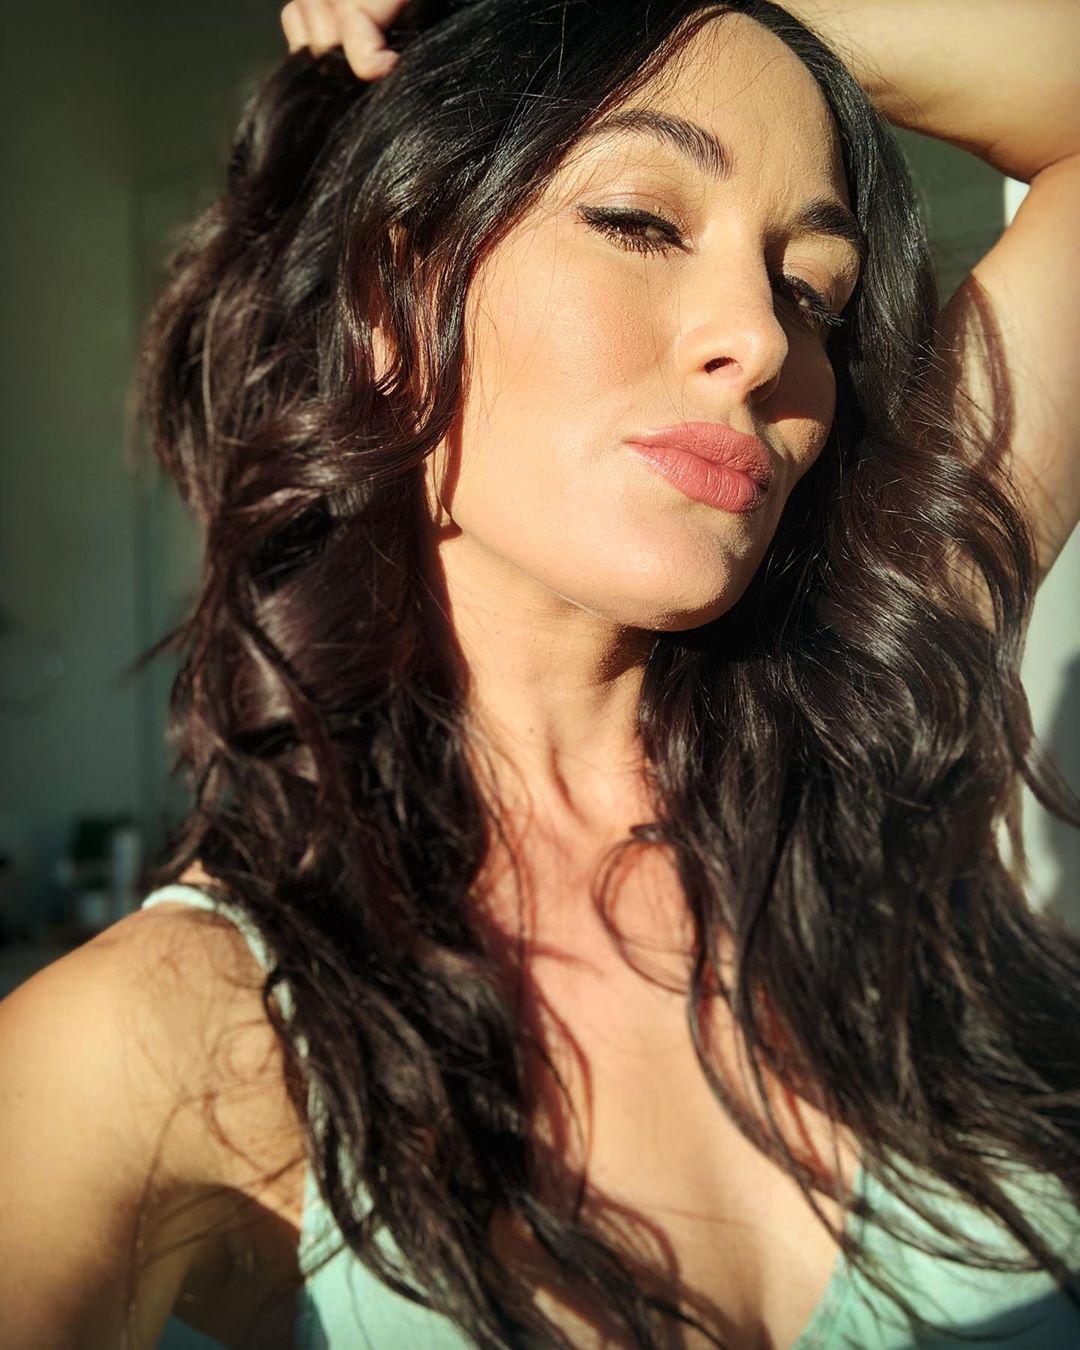 60+ Hot Pictures of Brie Bella Will Drive You Nuts For Her 6